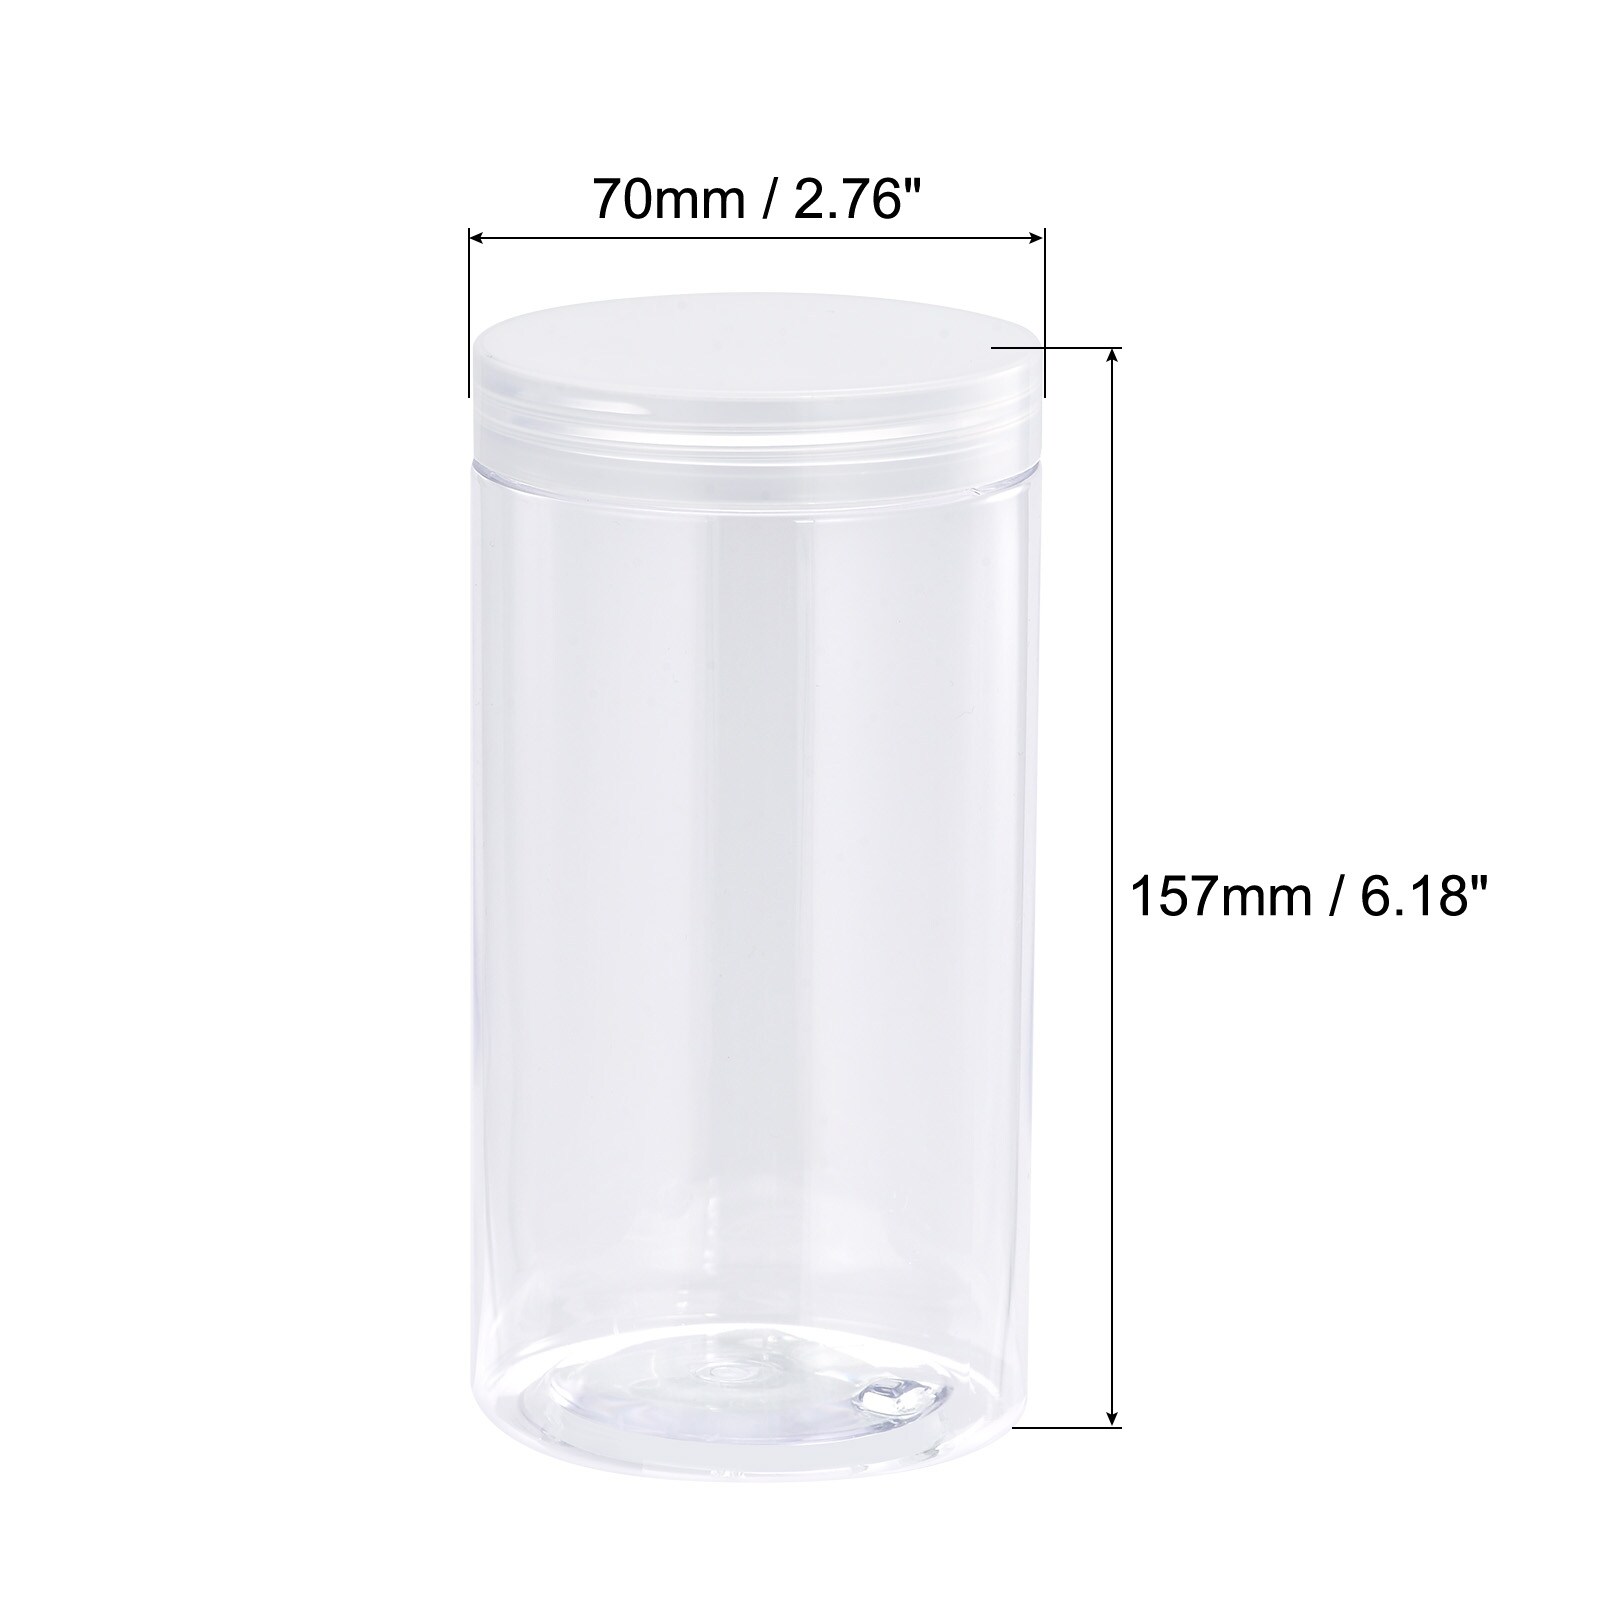 https://ak1.ostkcdn.com/images/products/is/images/direct/2e189a1bf953fc63b0946df660cc1d1ca5c7c240/Round-Plastic-Jars-with-Transparent-Screw-Top-Lid%2C-2Pcs.jpg